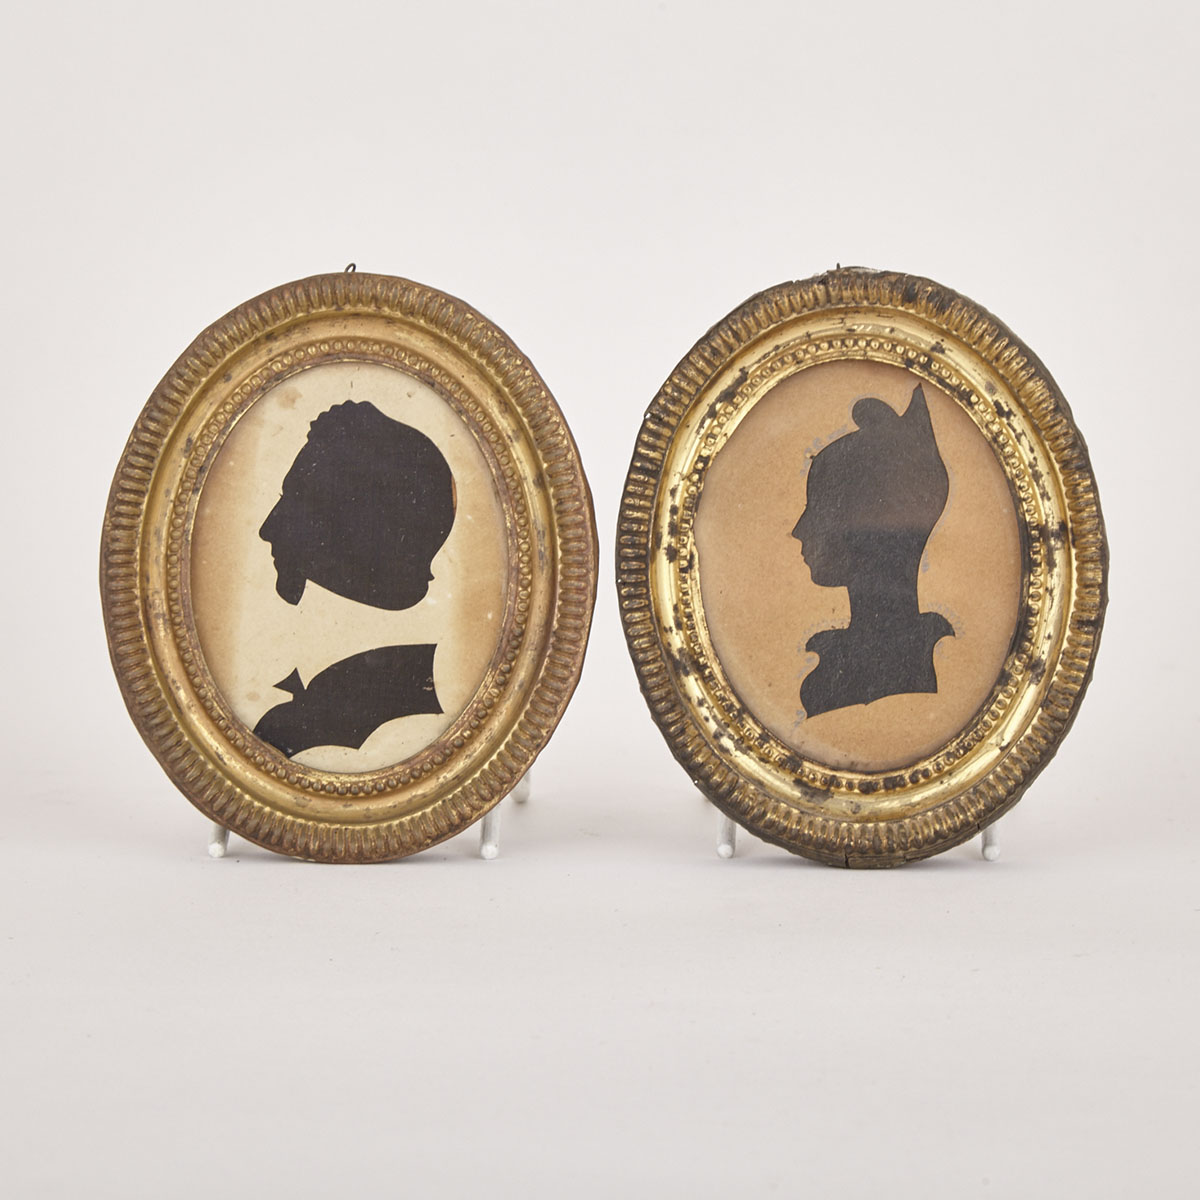 Pair of Regency Silhouette Portrait Ovals, early 19th century